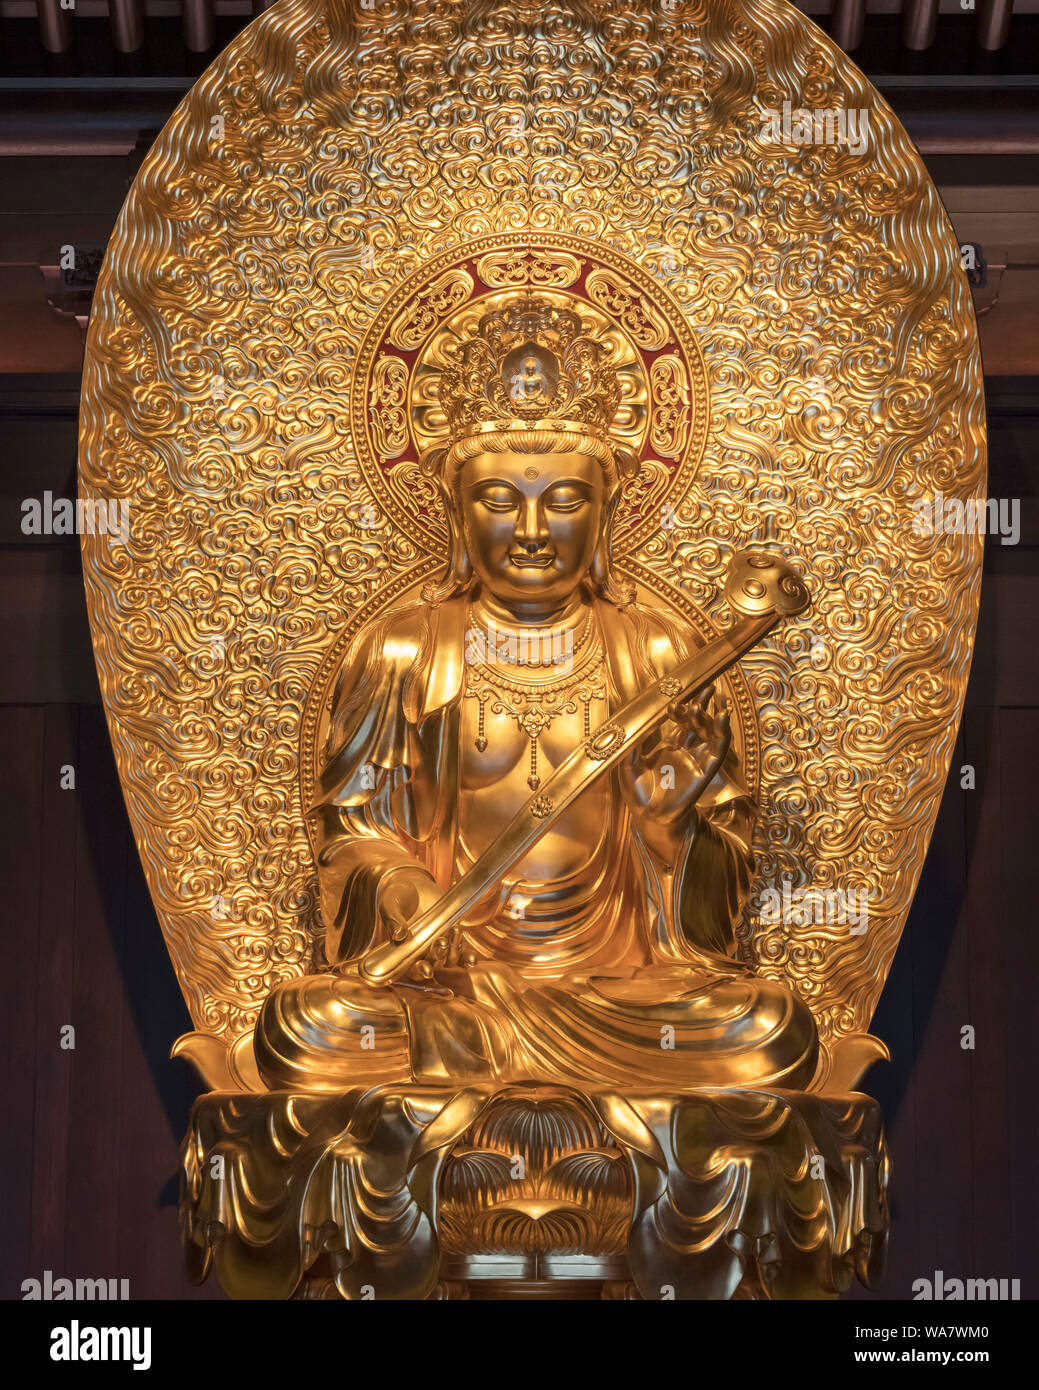 Statue of a Golden Buddha in the Jade Buddha Temple, Shanghai, China Stock Photo